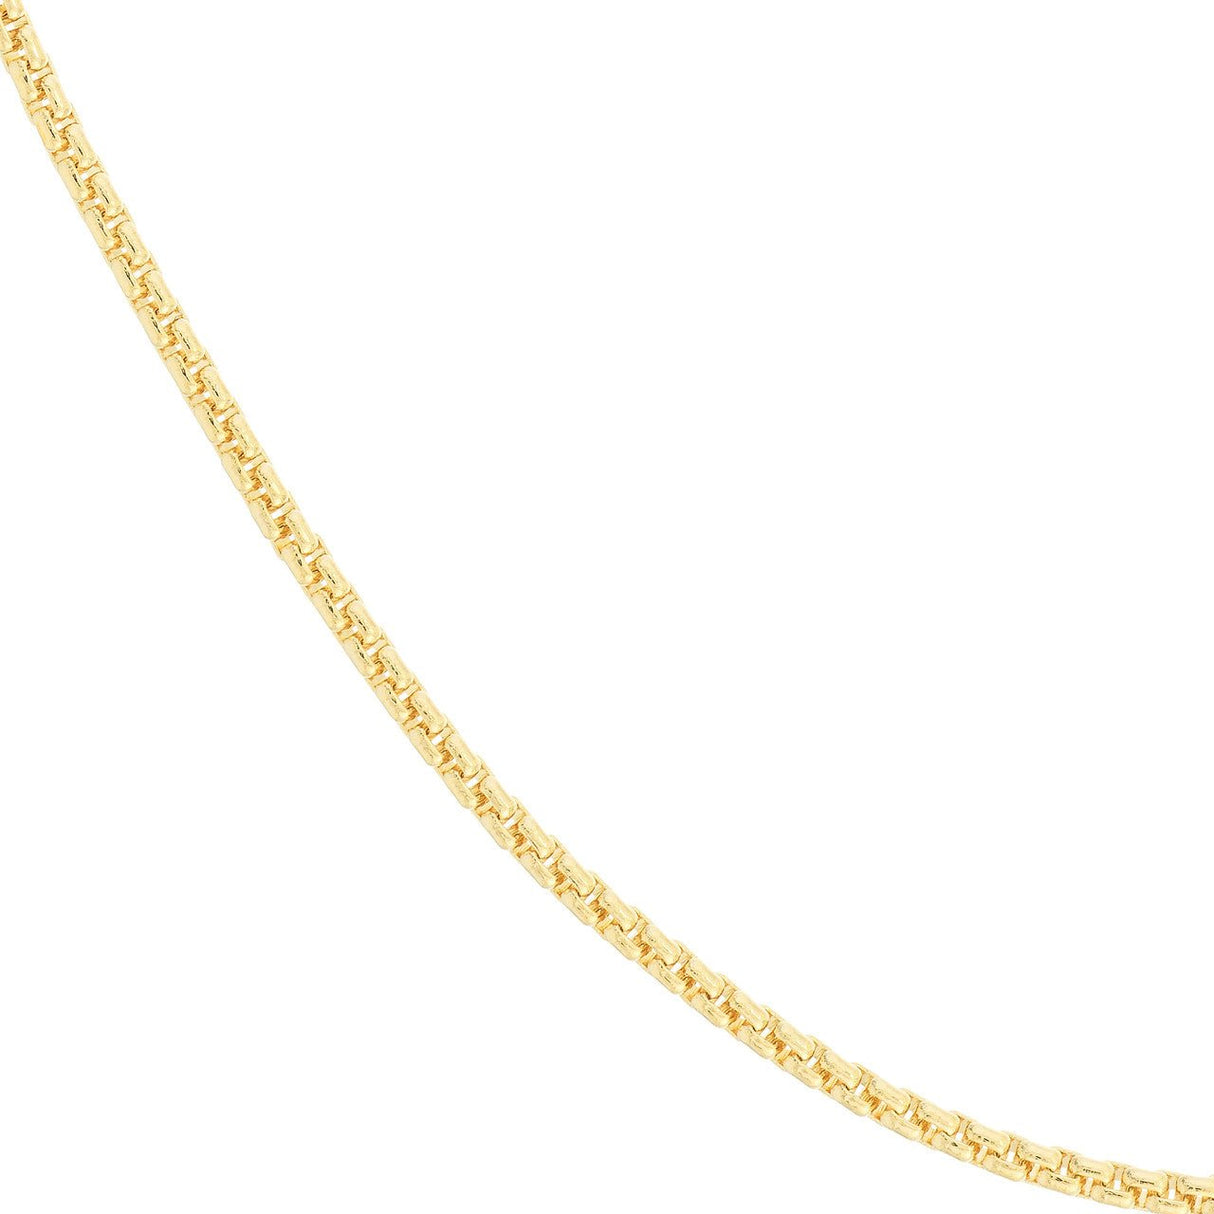 14K Gold Chain, 24", 1.75mm Solid Round Box Chain with Lobster Lock, Gold Layered Chain, Gold Chine Necklace, - Diamond Origin